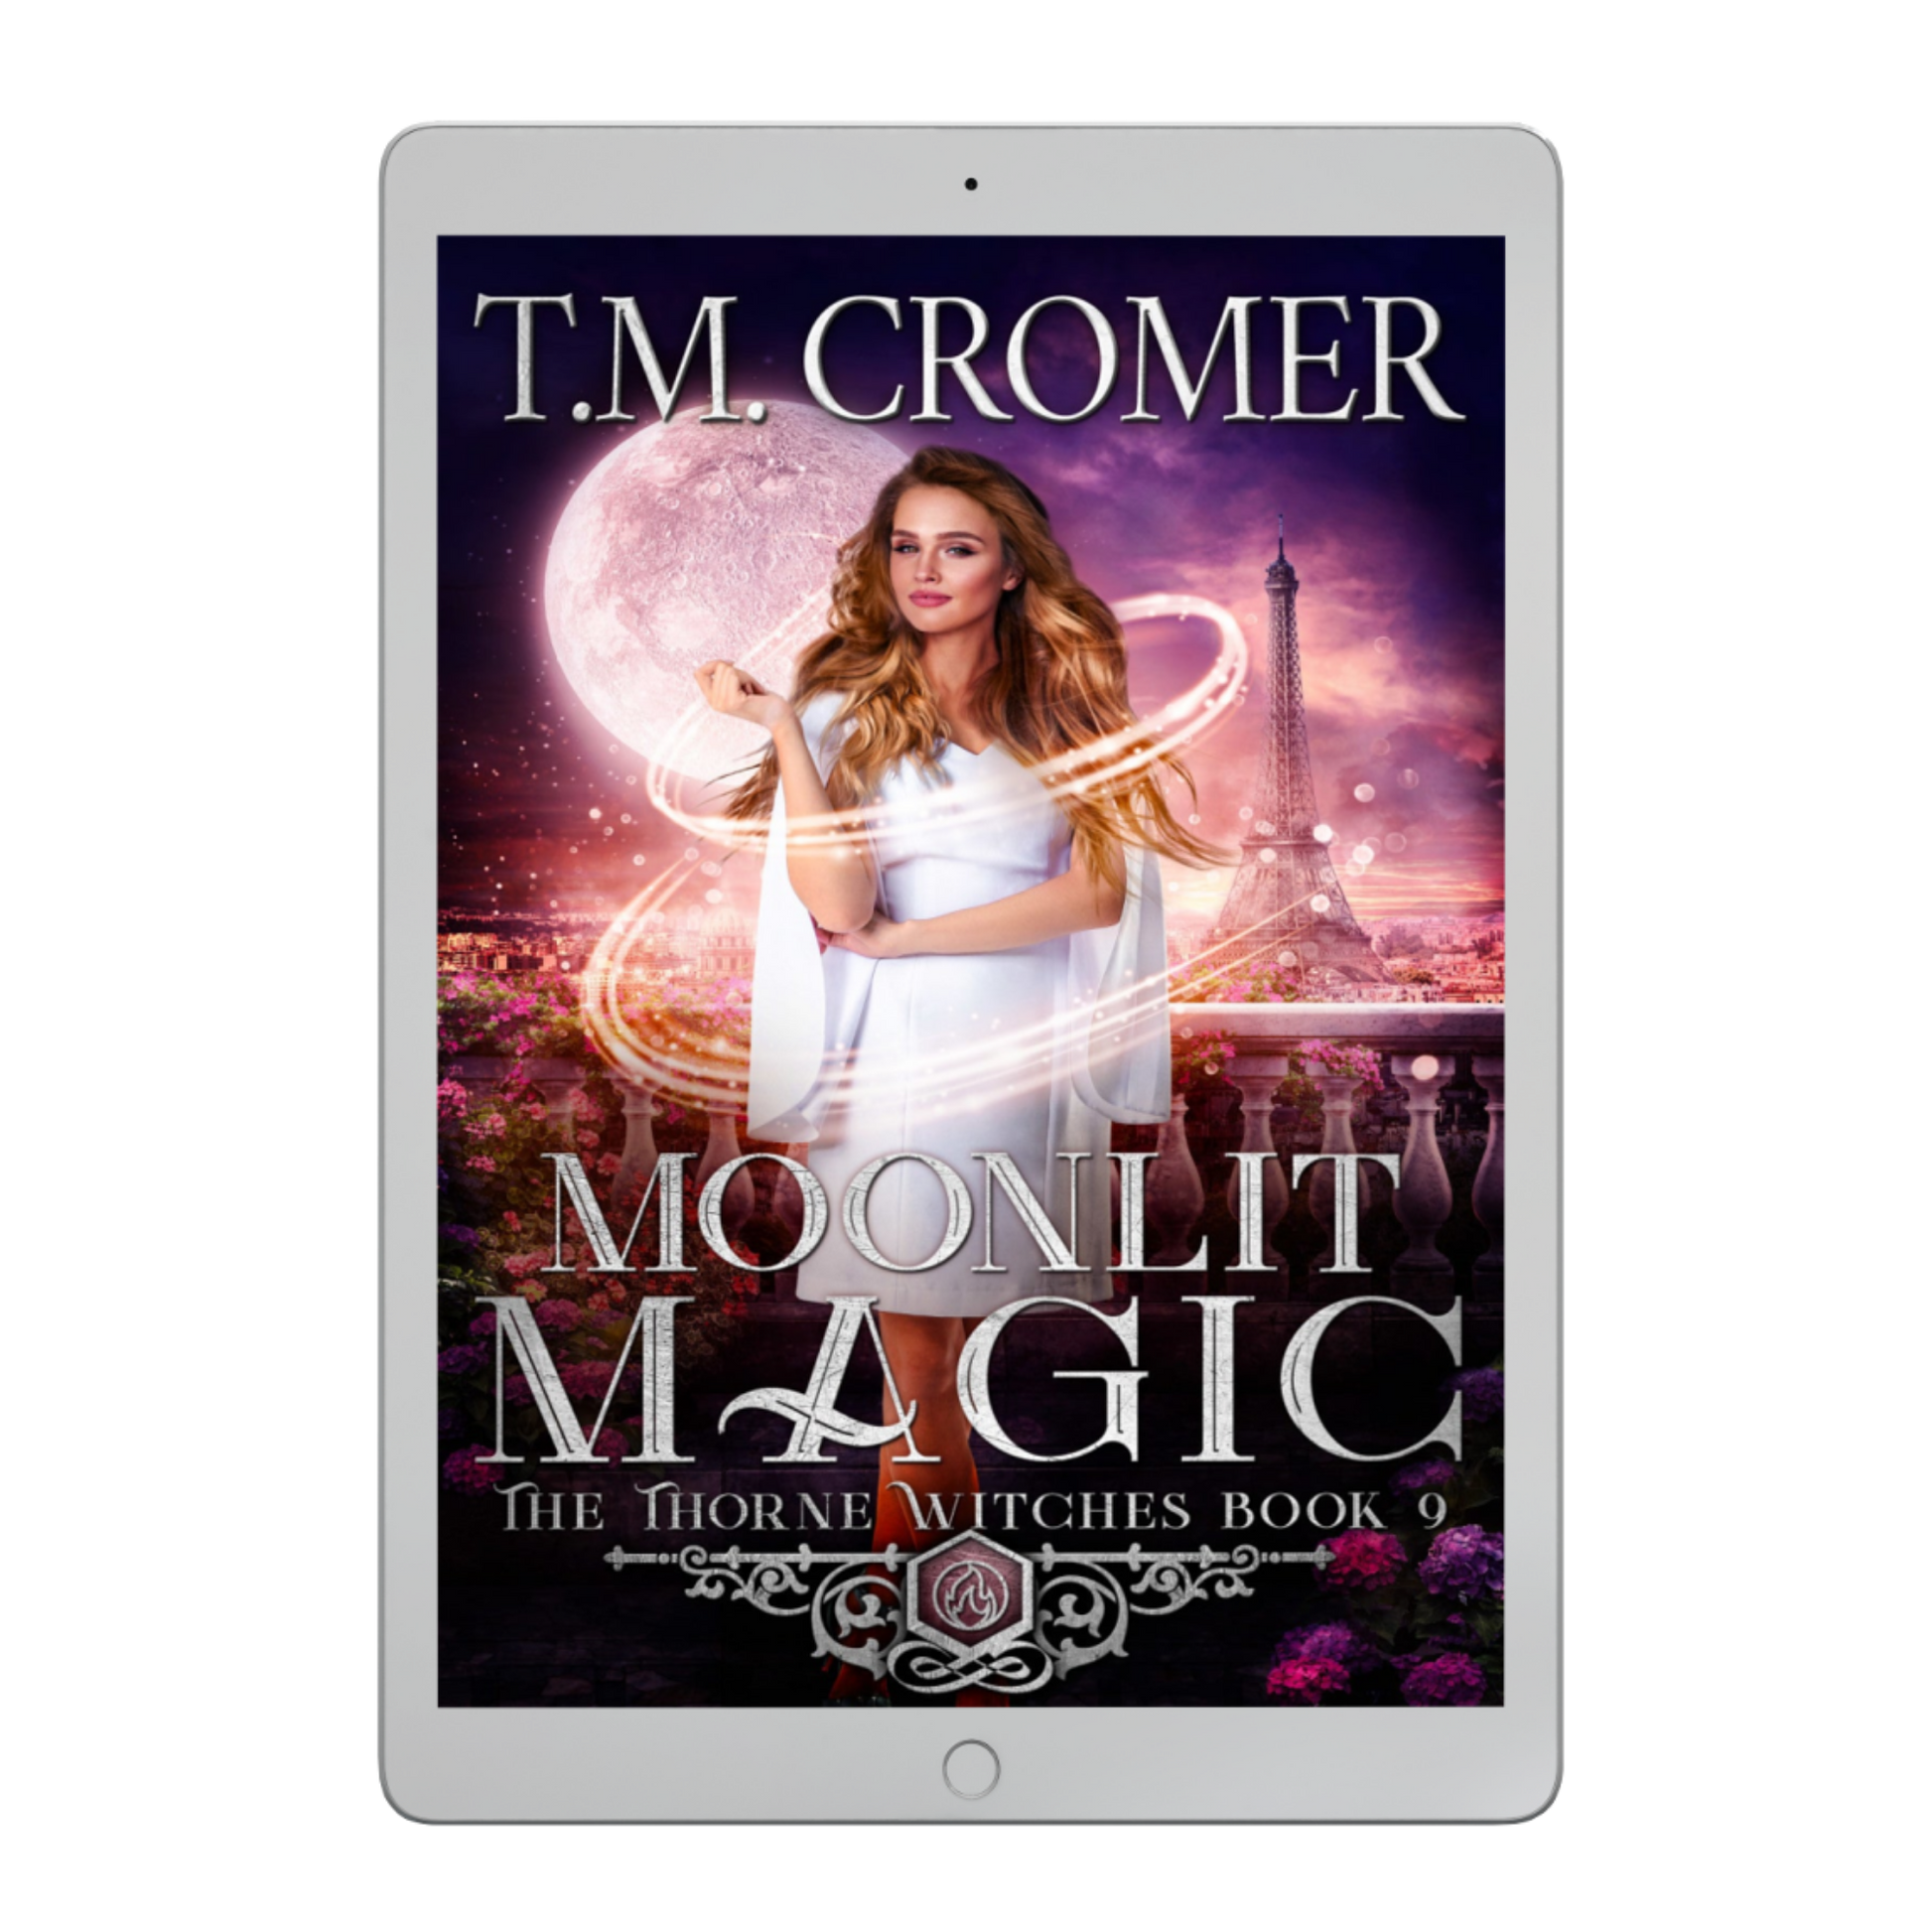 Moonlit Magic Ebook The Thorne Witches #9, Paranormal Romance, Urban Fantasy, Magical Realism